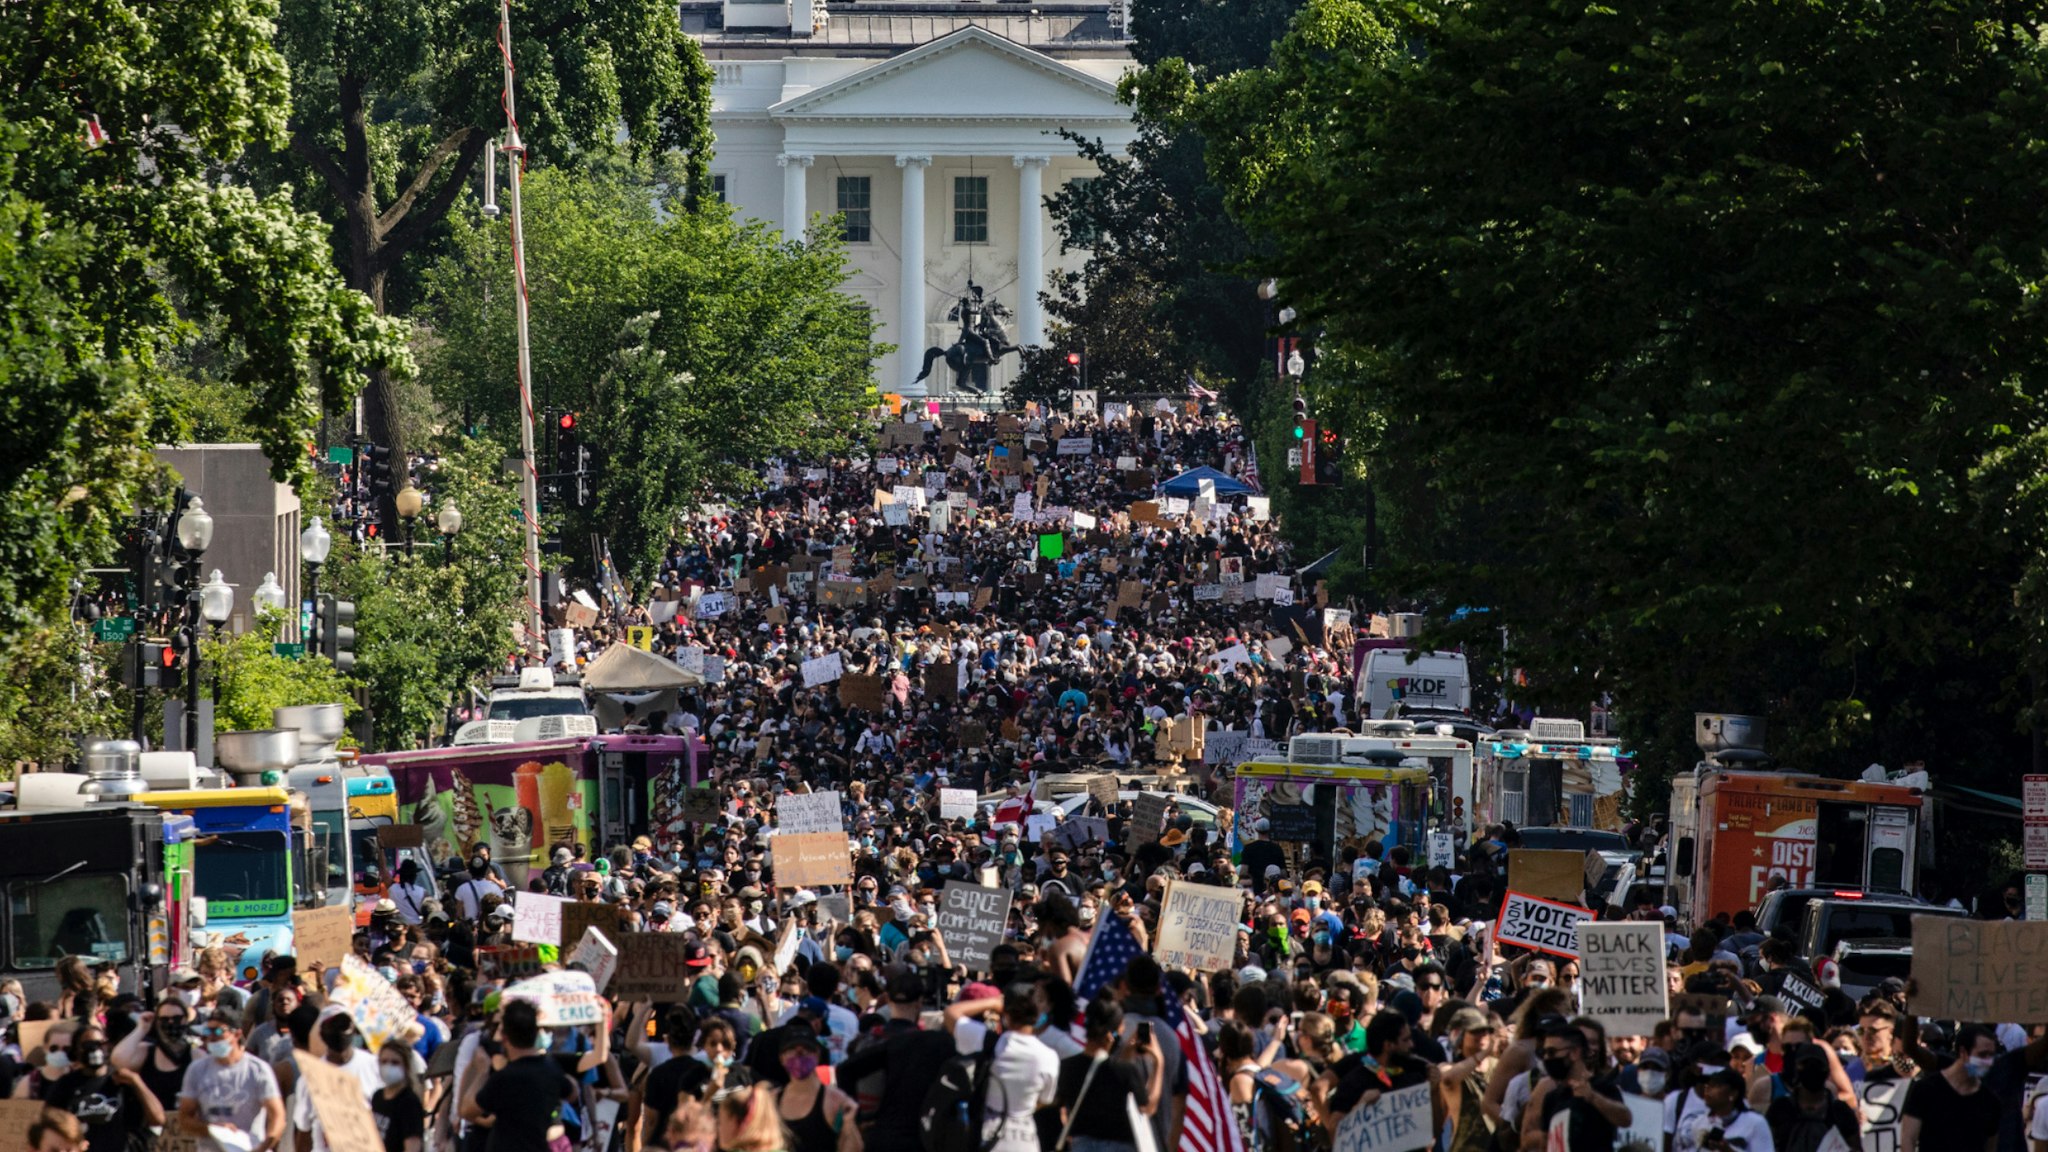 Protesters stretch for more than five blocks, from Scott Circle NW to H Street NW, during demonstrations over the death of George Floyd near the White House on June 6, 2020 in Washington, DC.